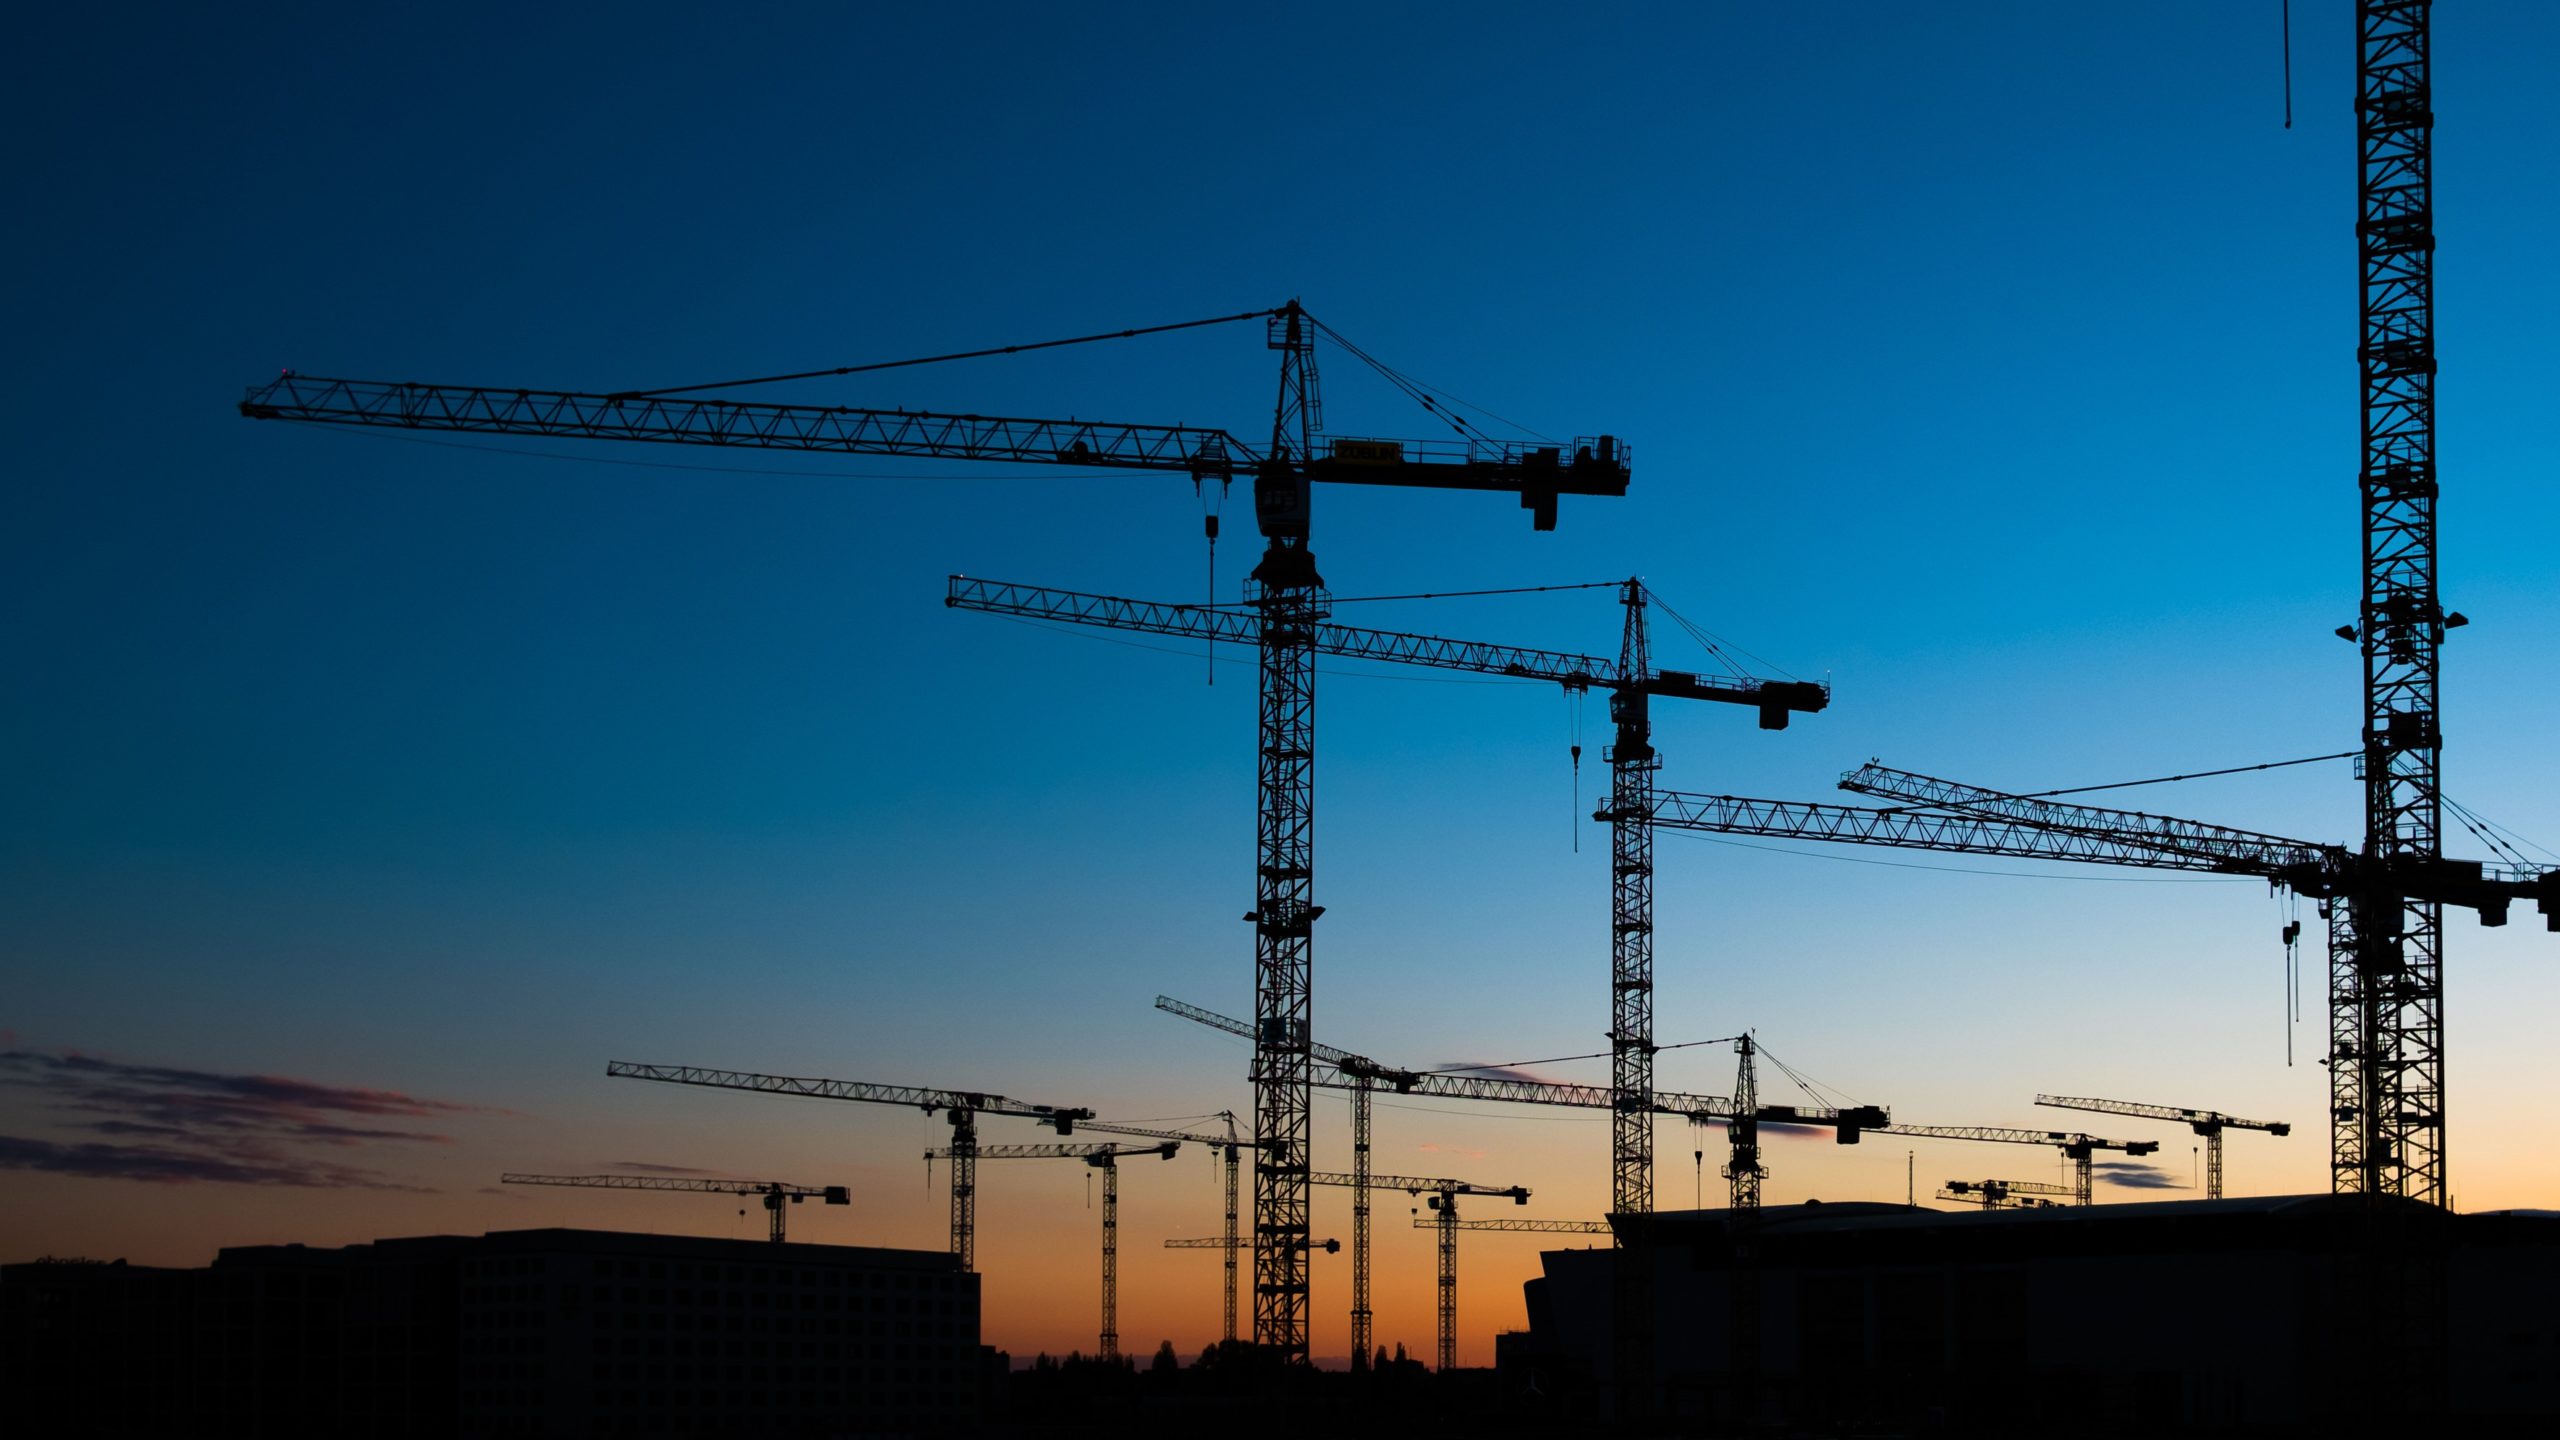 The silhouette of tower cranes on a construction site at sunset.